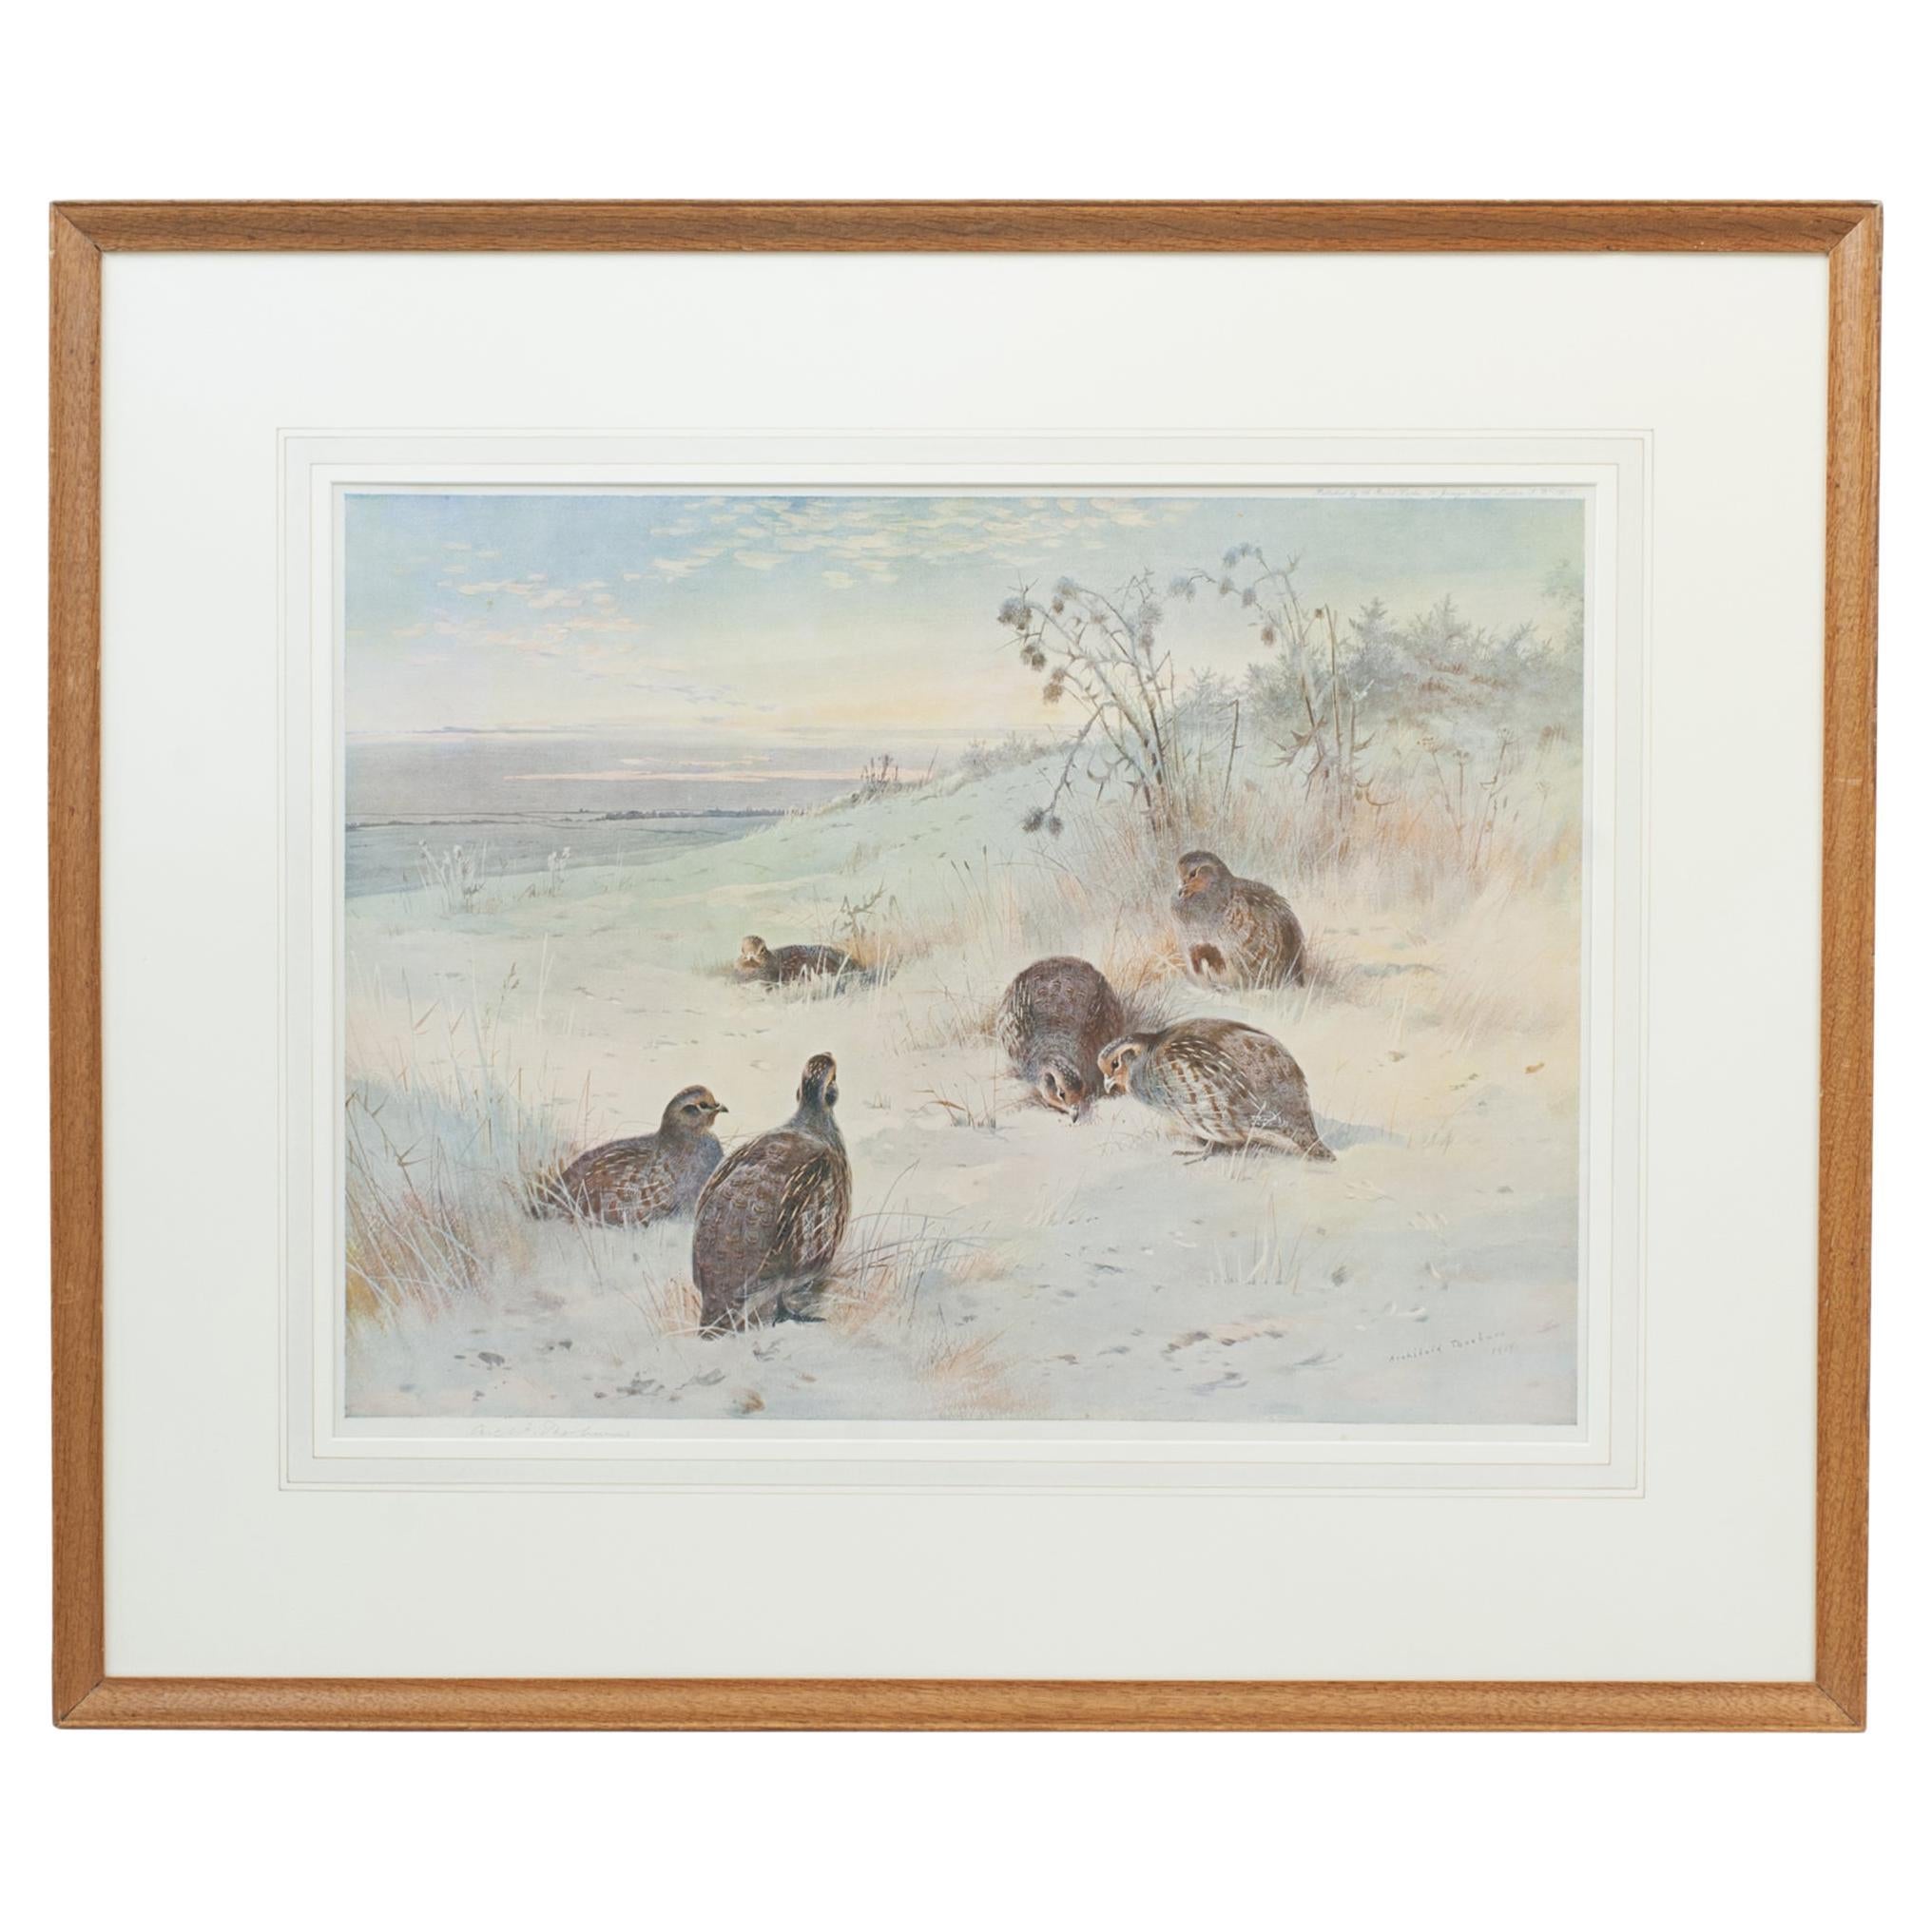 Antique Bird Print, Signed by Archibald Thorburn, Partridges, a Frosty Morning. For Sale